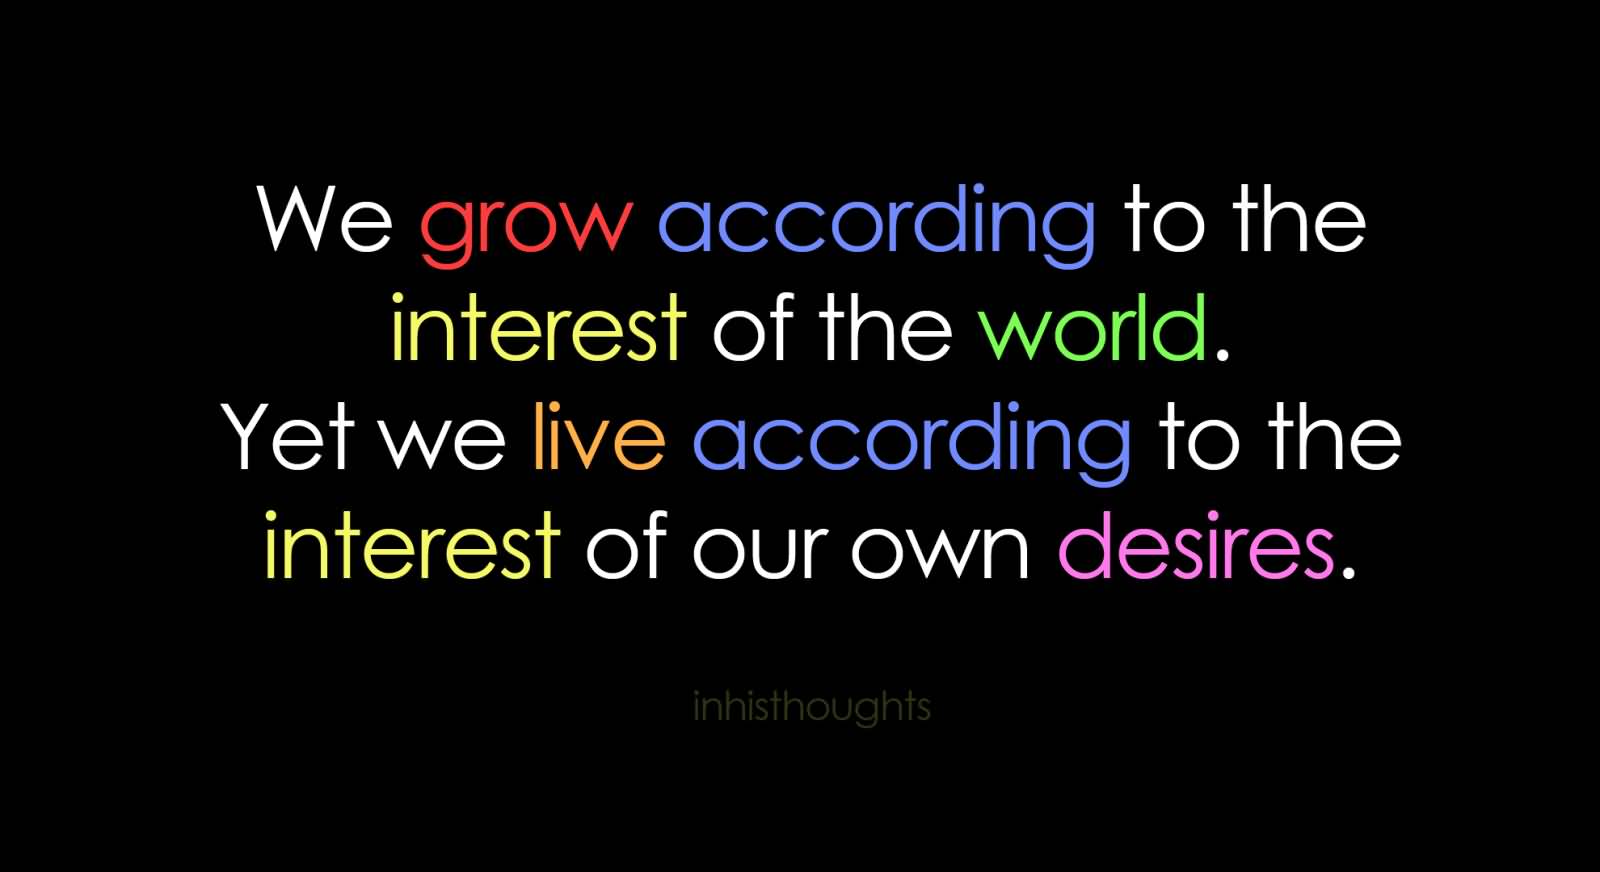 We grow according to the interest of the world; yet we live according to the interest of our own desires